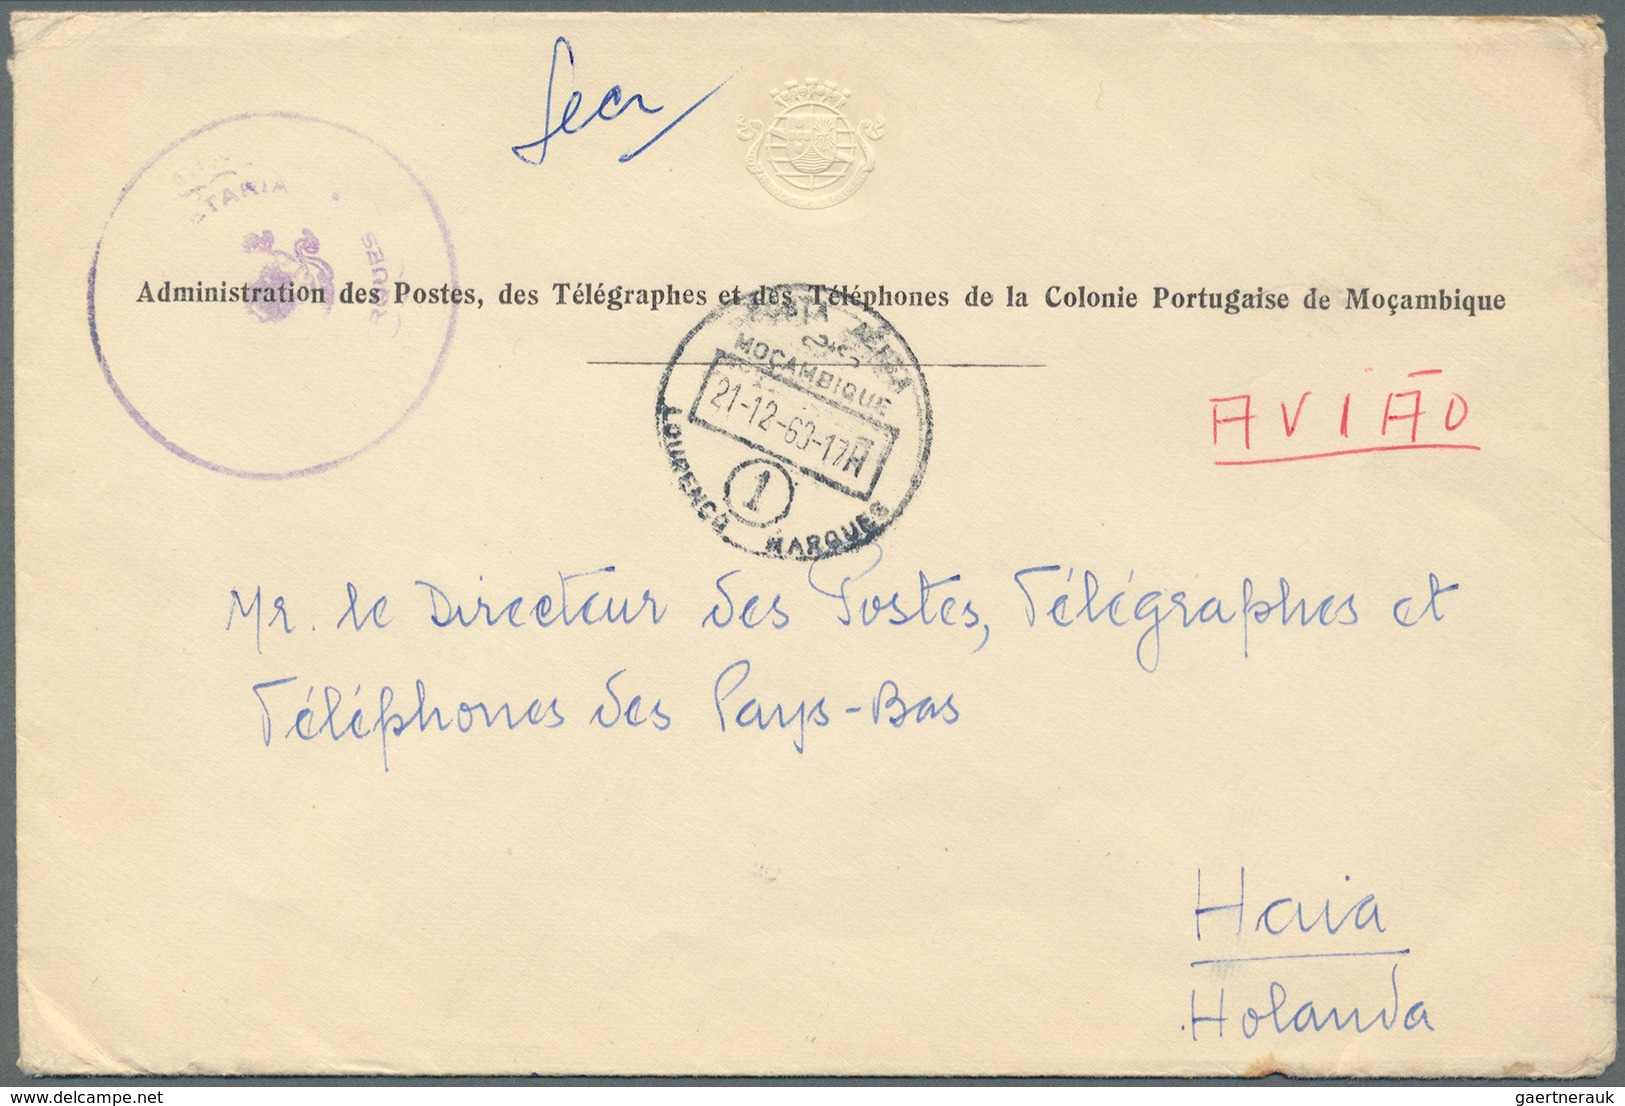 23667 Mocambique: 1894/1985, 192 covers, cards, ancient picture postcards, arimail, many good postal stati